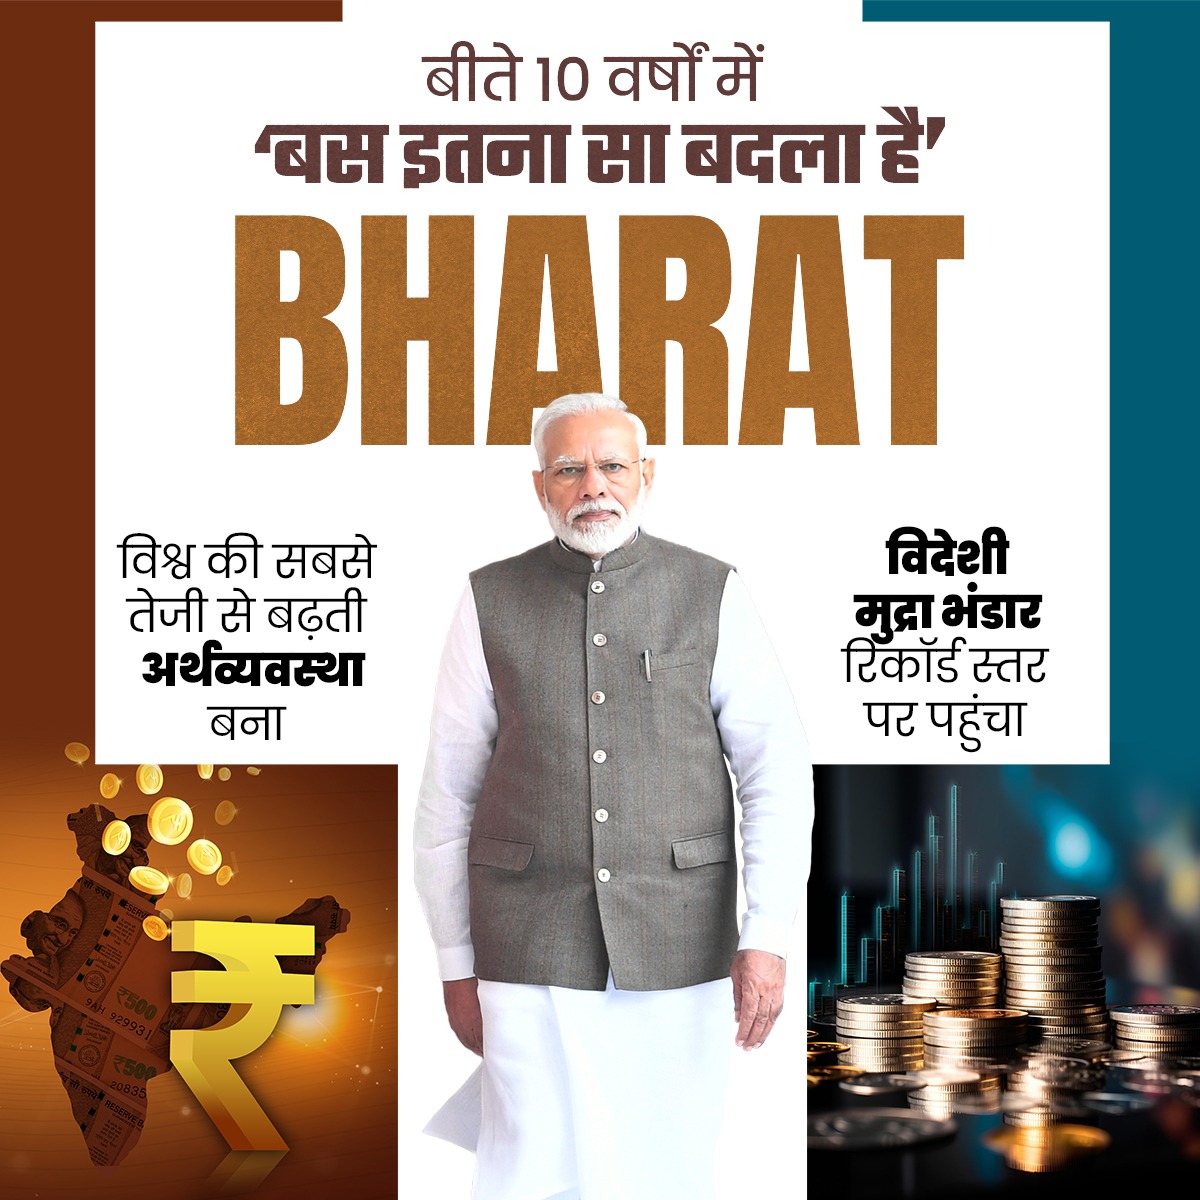 In the past 10 years, 'Just this much has changed' BHARAT, the fastest growing economy, became the fifth-largest economy in the world; and reached record levels of foreign currency reserves. #Modi2024 #BJPHumuraSankalp